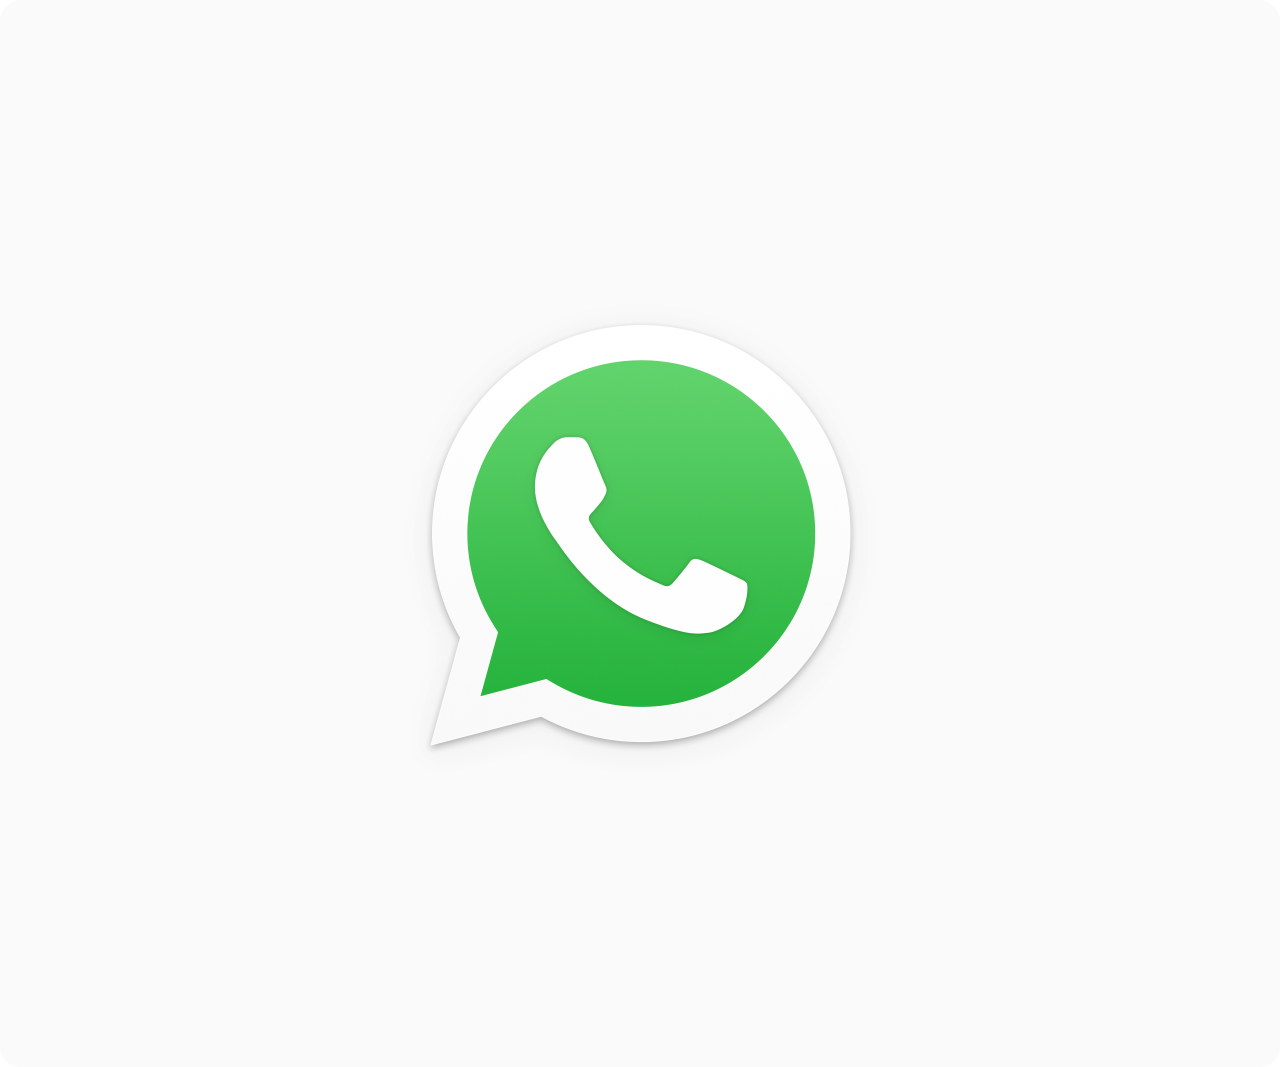 Image for:Reachability of our Service-Hotline via WhatsApp